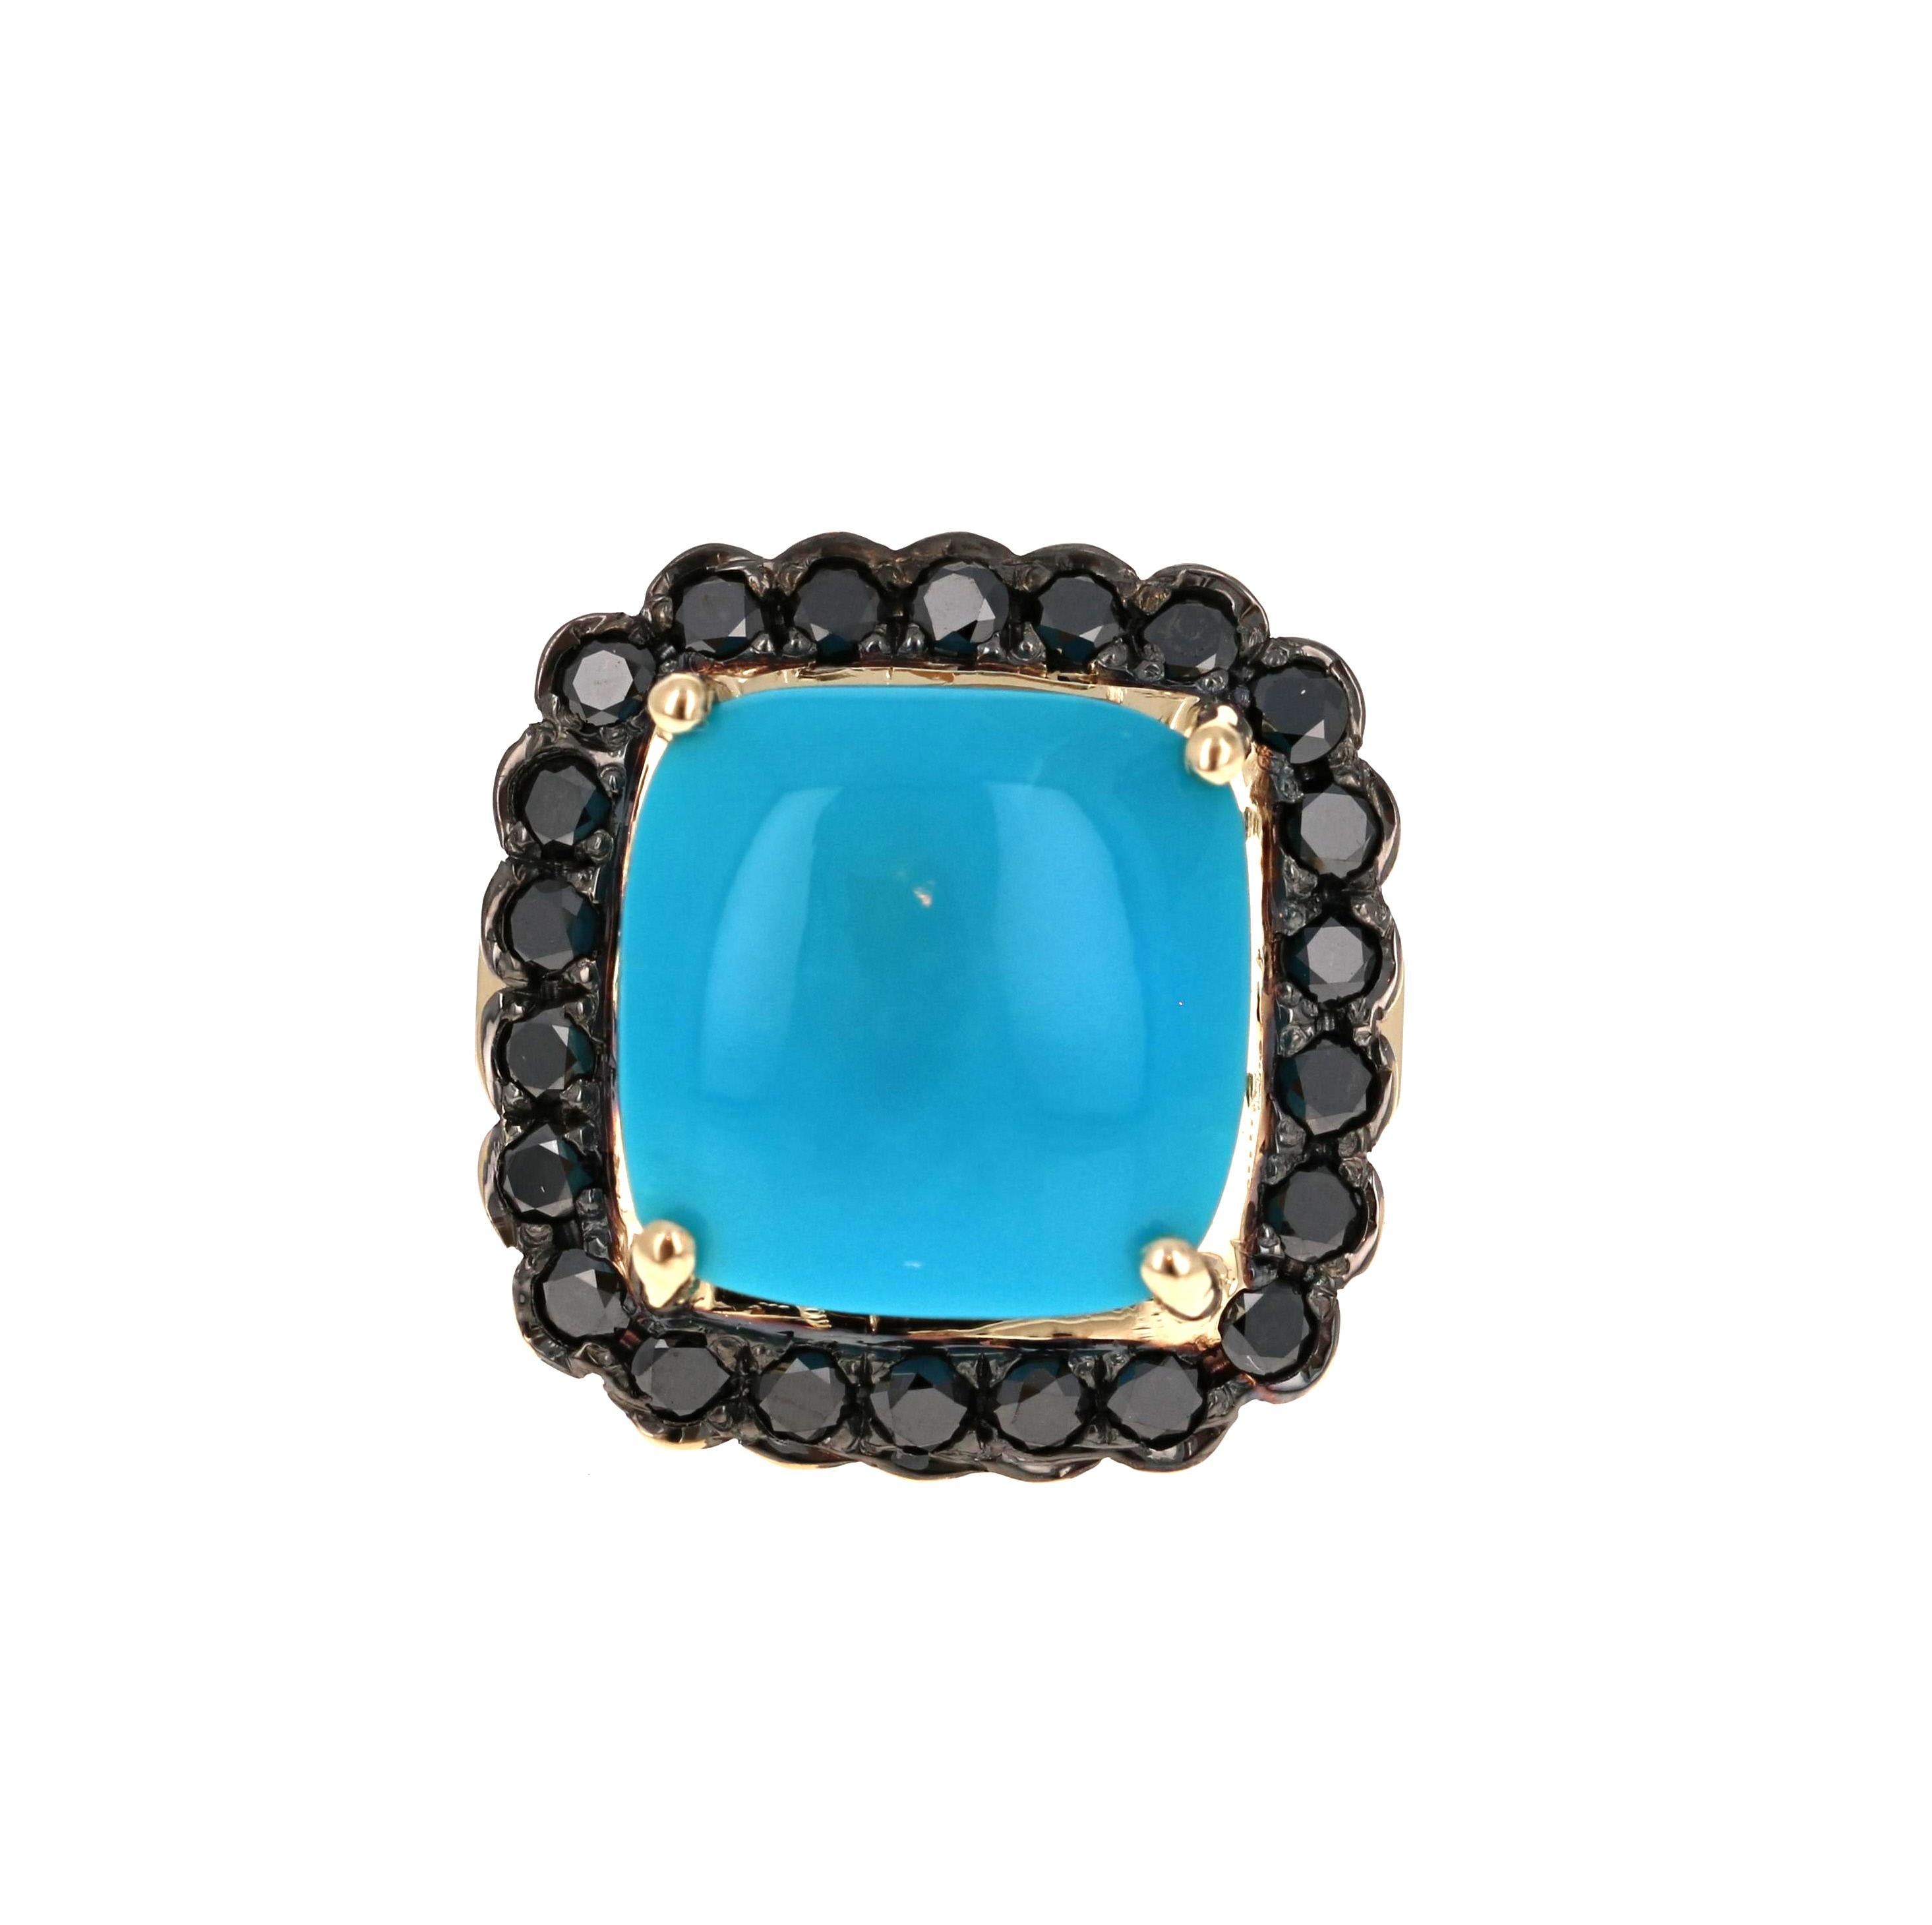 A unique stunner! 

This ring has a large 9.45 Carat Cushion Cut Turquoise and is surrounded by 22 Pave Set Black Round Cut Diamonds that weigh 1.29 Carats. The shank of the ring is accented with 6 White Round Cut Diamonds that weigh 0.20 Carats.